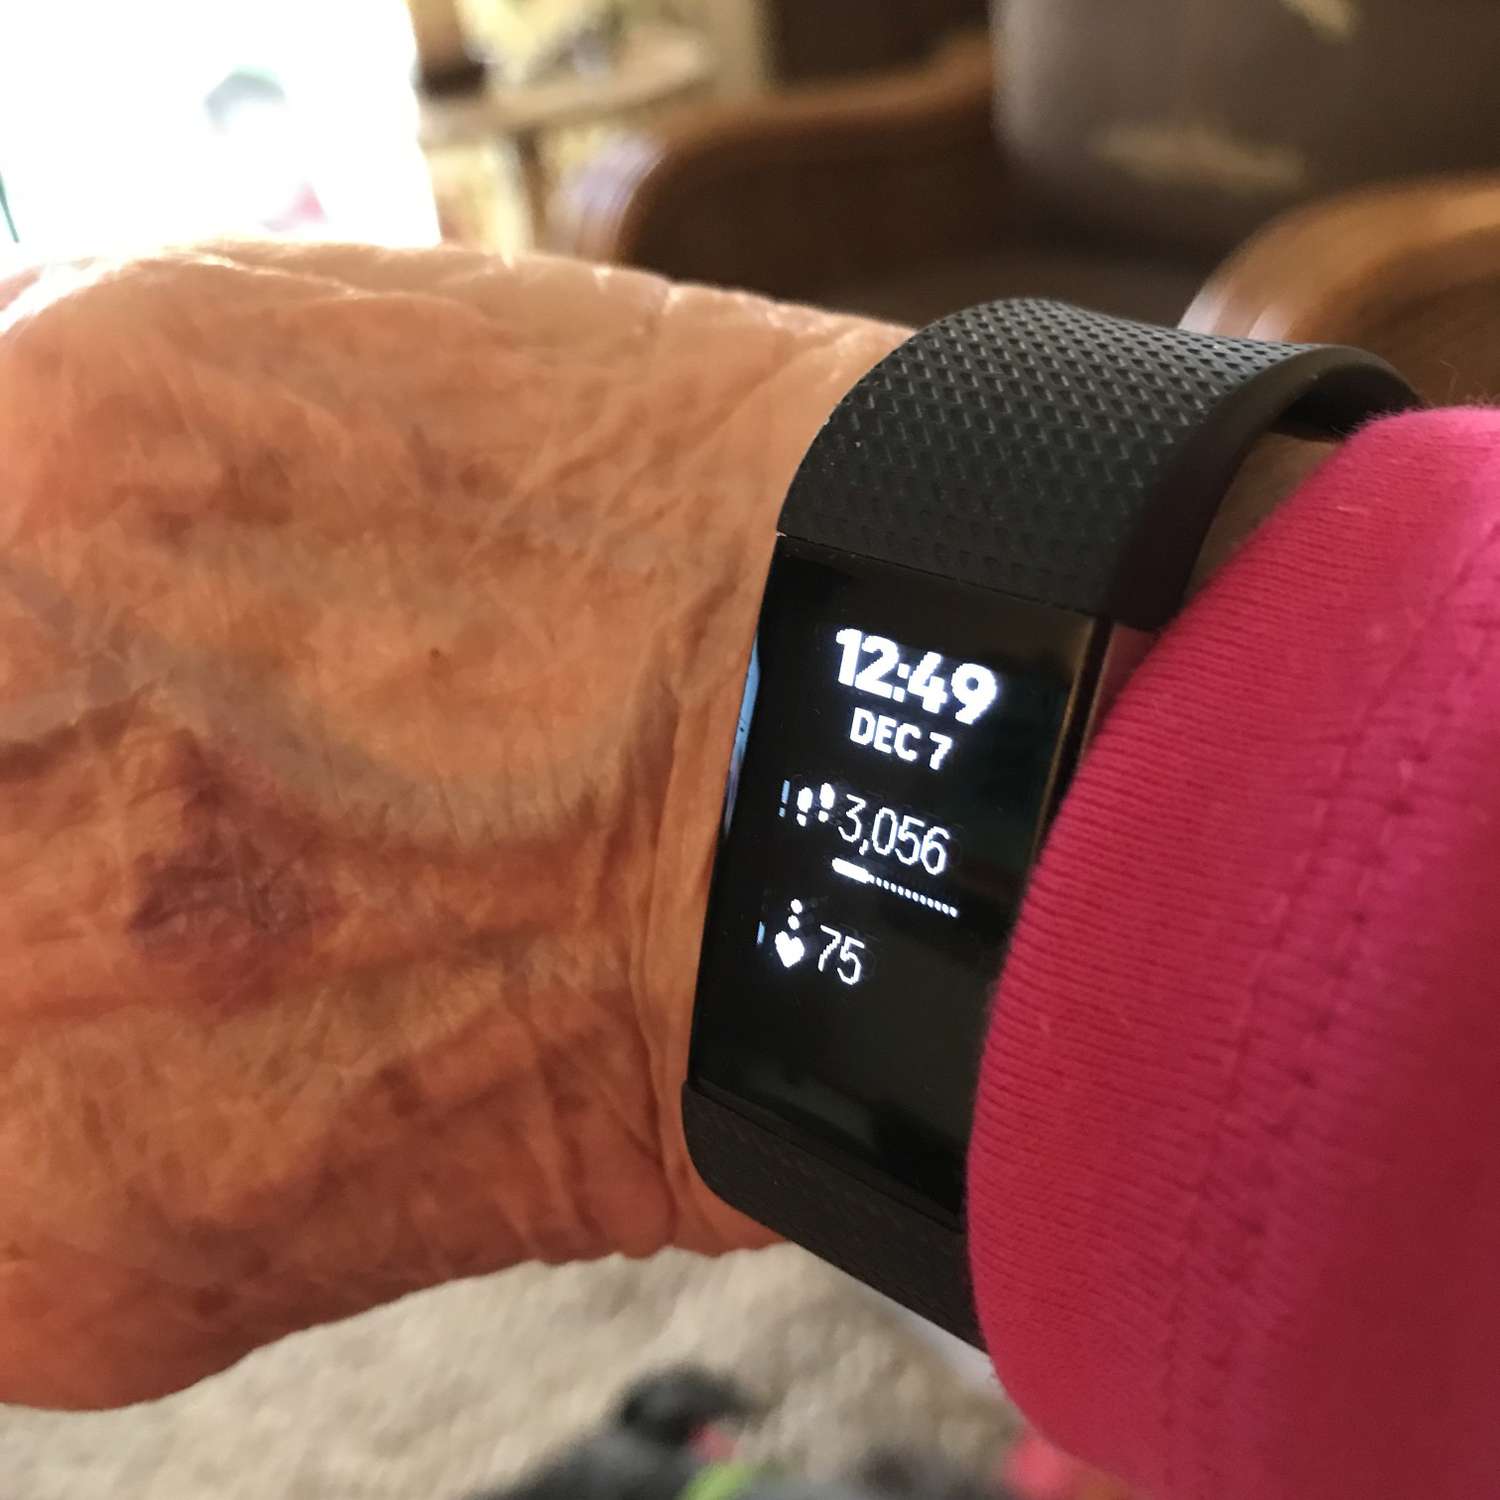 step-accuracy-assessing-the-precision-of-fitbit-steps